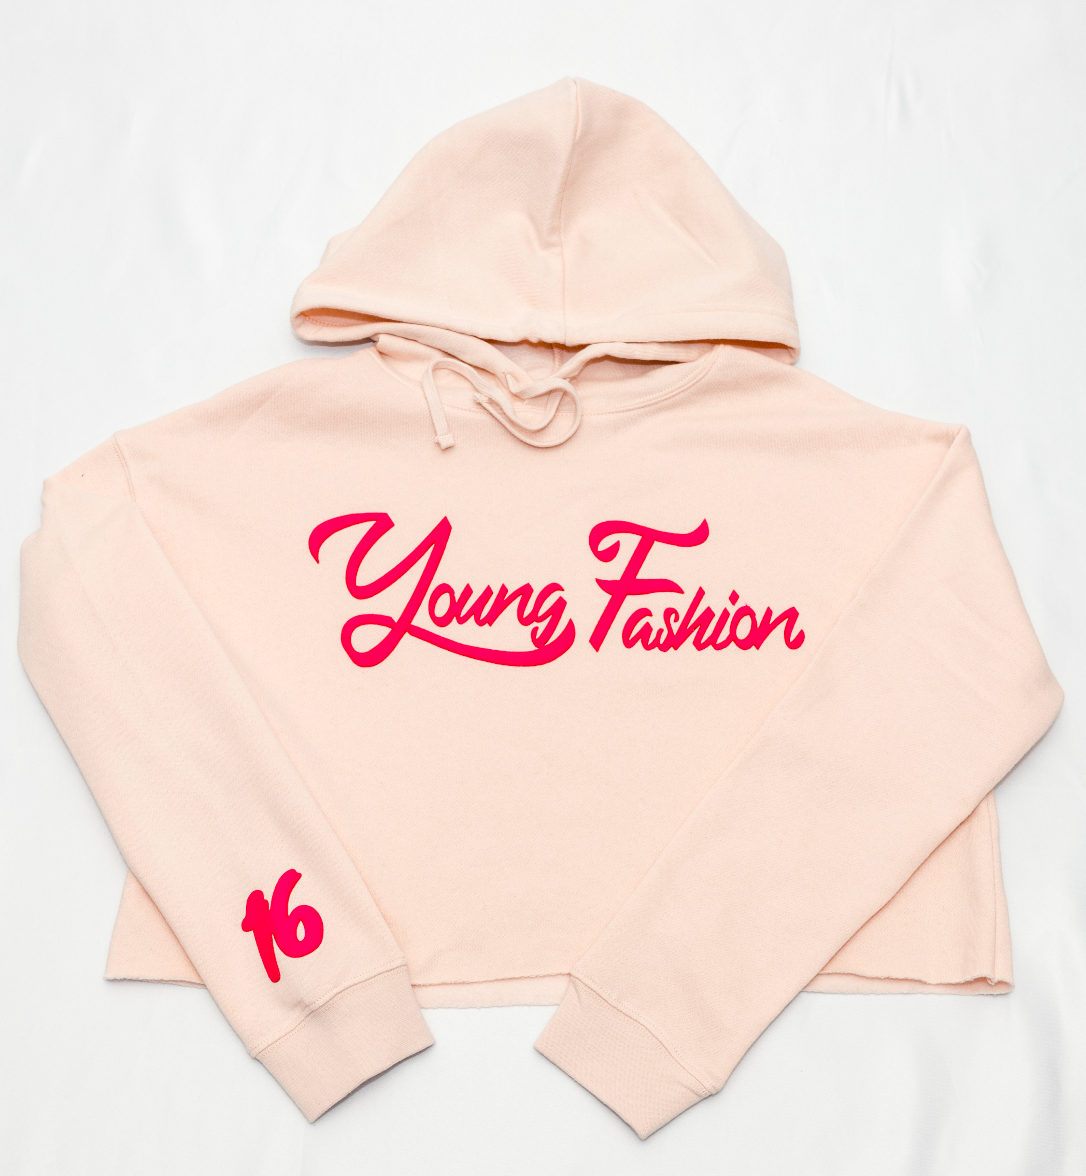 Young Fashion 16 Spring Crop Top Hoodies